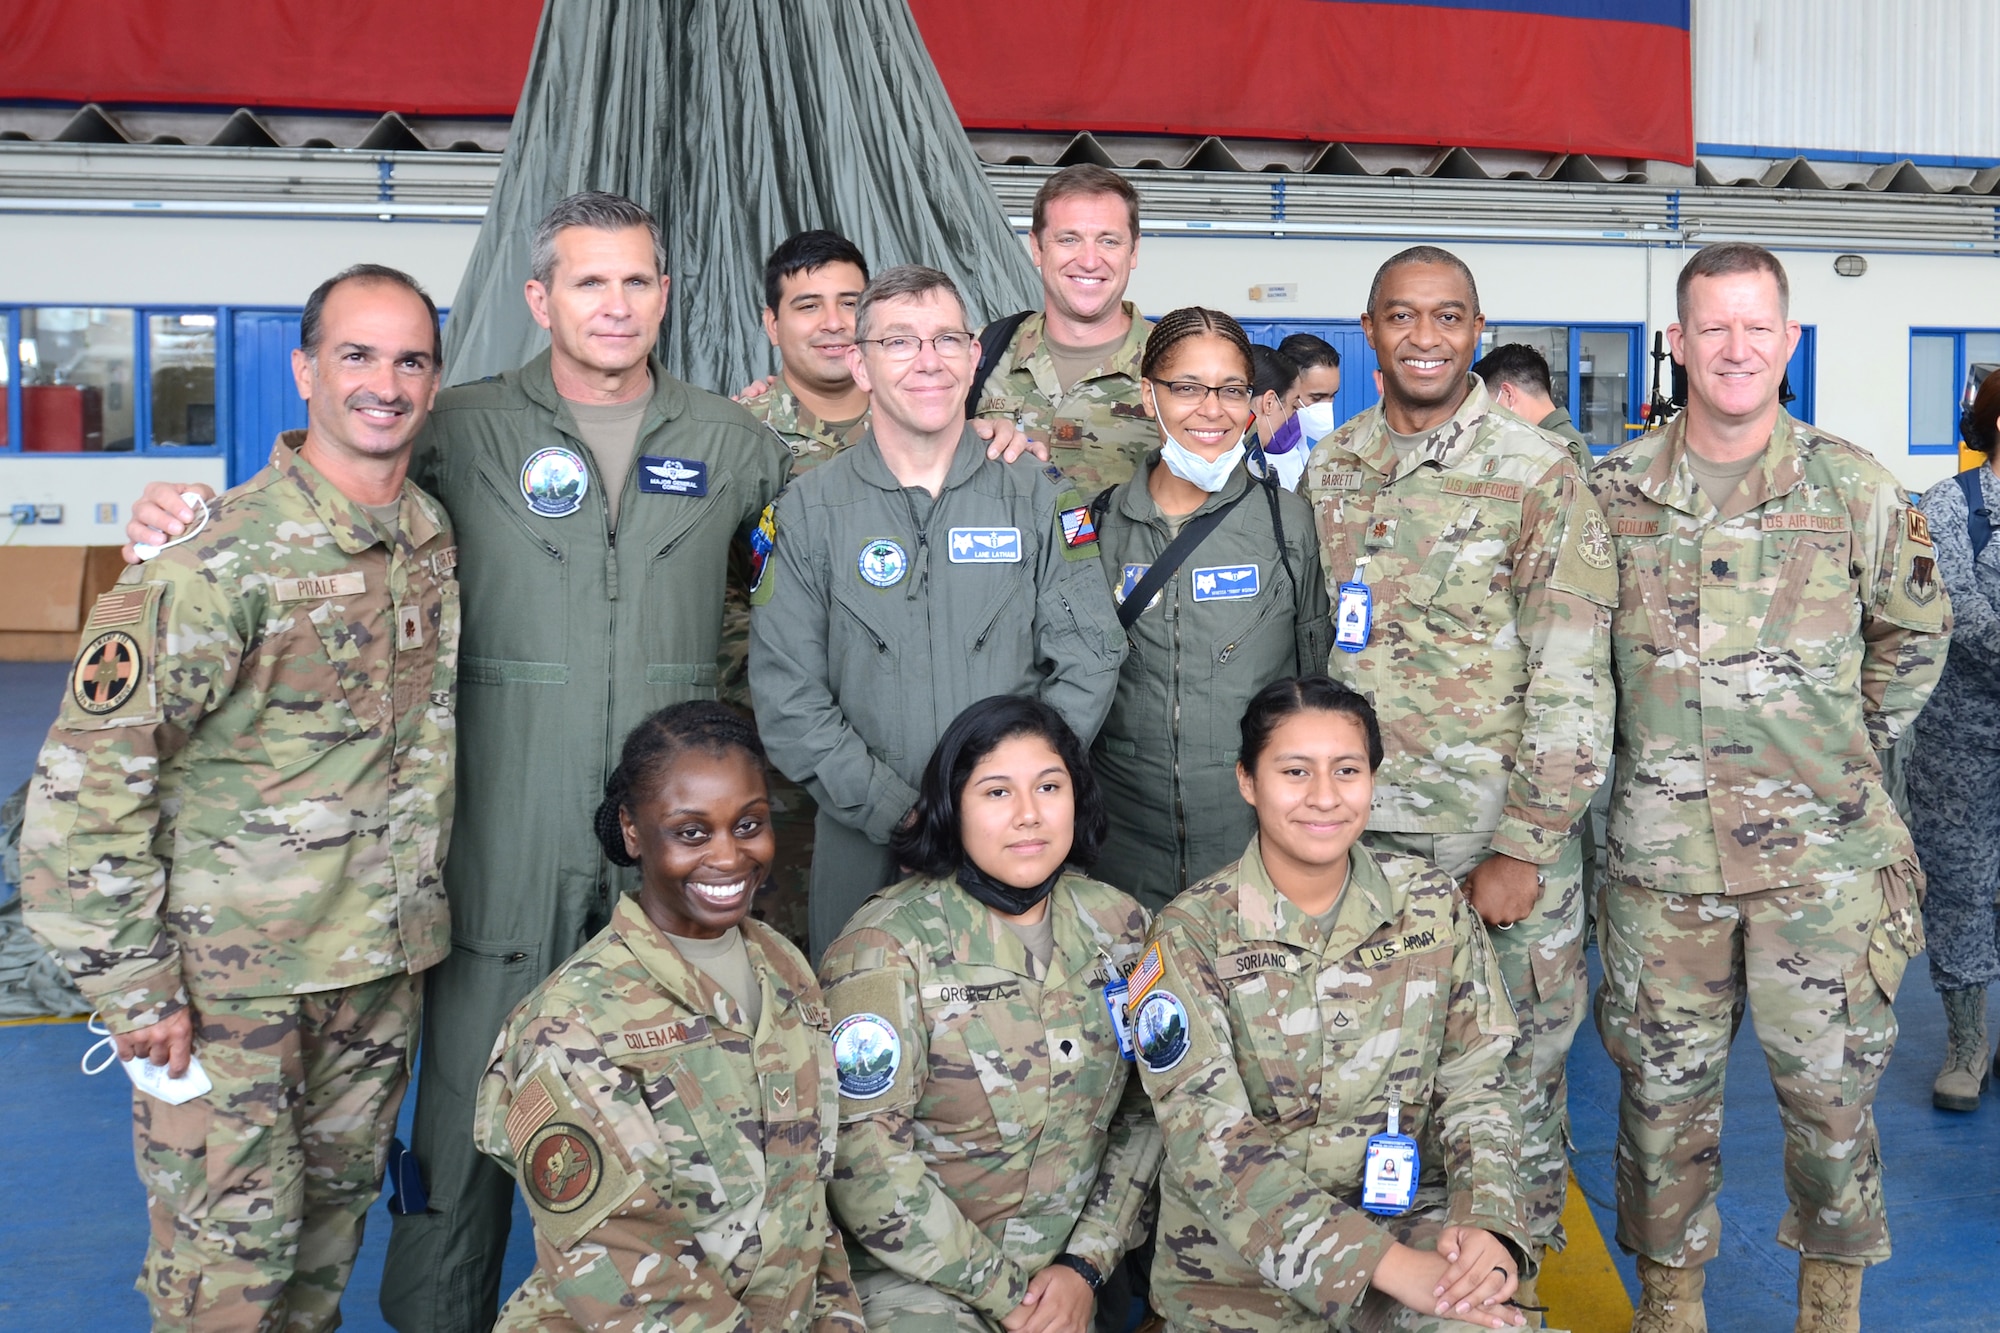 Doctors and med techs from the South Carolina Air National Guard’s 169th Medical Group plus medics from the South Carolina Army National Guard pose with U.S. Air Force Maj. Gen. Barry R. Cornish (second from left), U.S. Air Forces Southern Commander, September 4, 2021. The medical personnel later traveled to the remote town of Tamana, Colombia to participate in a real-word community medical and humanitarian support mission. While there, the medical personnel provided dental, optical, dermatology, pharmacy and general medical care to more than 300 patients. South Carolina Air National Guard and South Carolina Army National Guard medical personnel participate in the regional Ángel de los Andes (Angel of the Andes) and Cooperación VII exercises in Colombia August 30 to September 10, 2021. The exercises provide training opportunities with South Carolina’s state partner Colombia in realistic combat search and rescue missions as well as humanitarian aid and disaster response scenarios such as earthquakes and tsunamis. (U.S. Air National Guard photo by Lt. Col. Jim St.Clair, 169th Fighter Wing Public Affairs)